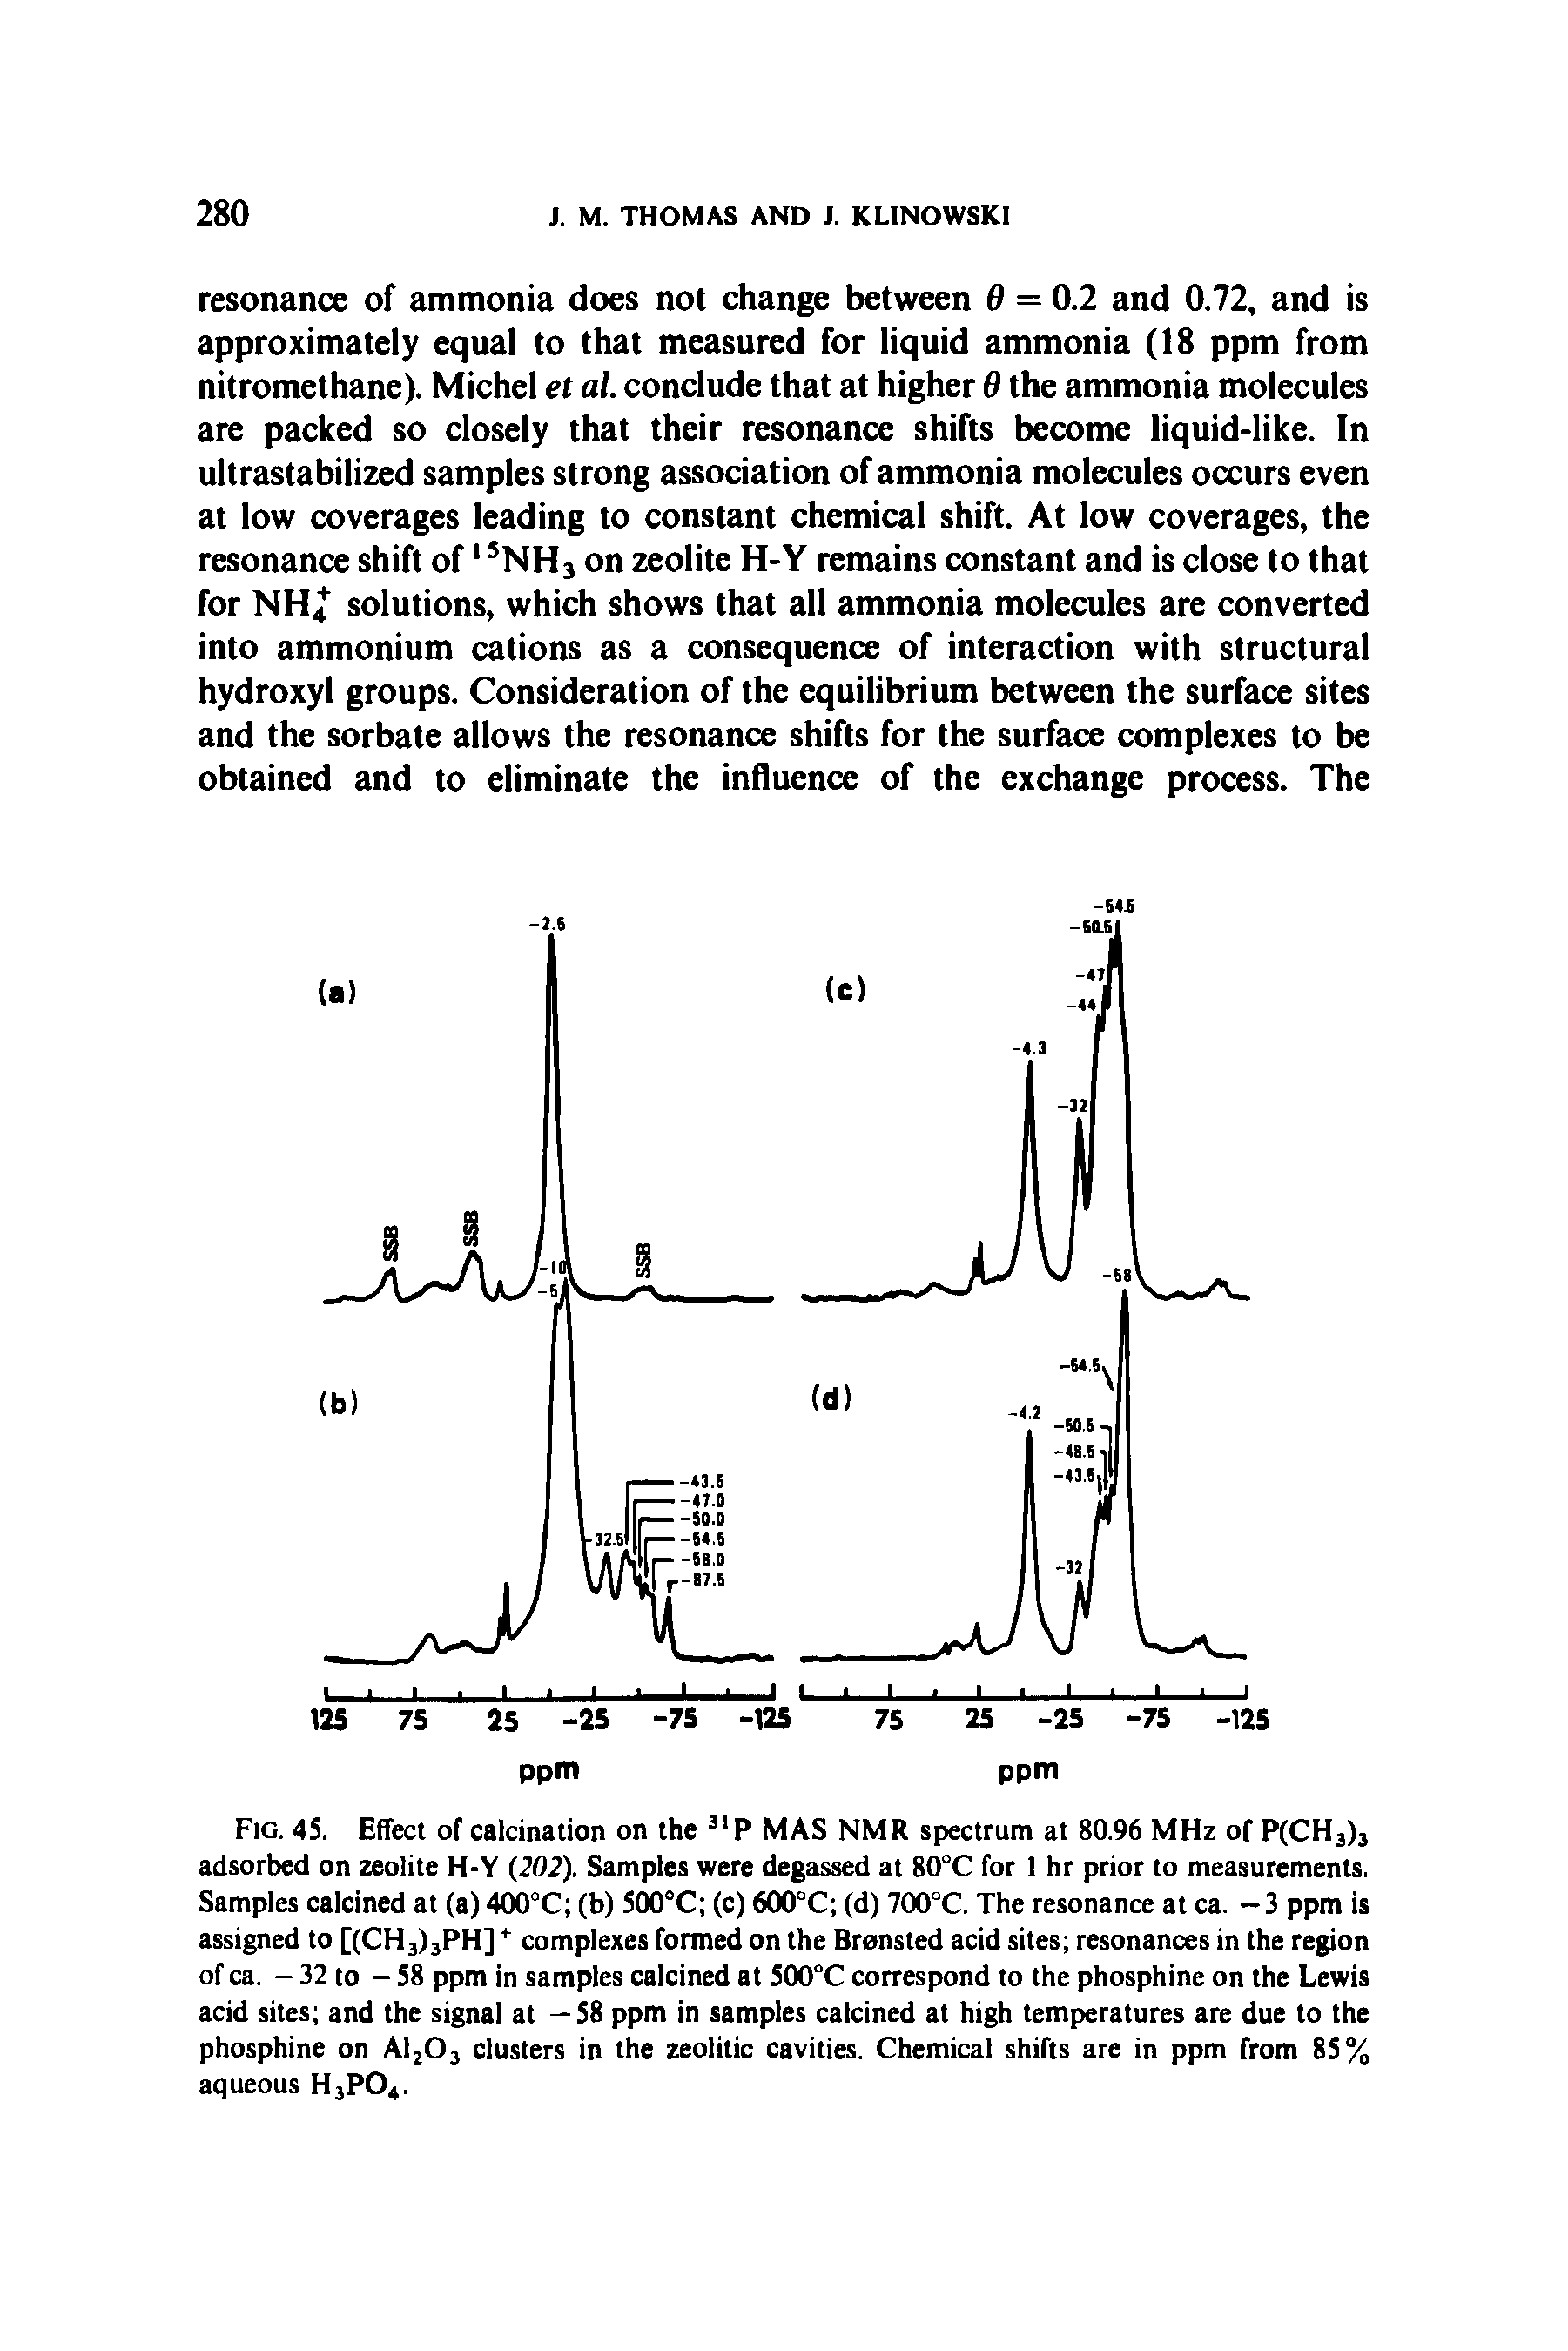 Fig. 45. Effect of calcination on the 31P MAS NMR spectrum at 80.96 MHz of P(CH3)3 adsorbed on zeolite H-Y (202). Samples were degassed at 80°C for 1 hr prior to measurements. Samples calcined at (a) 400°C (b) 500°C (c) 600°C (d) 700°C. The resonance at ca. —3 ppm is assigned to [(CH3)3PH] + complexes formed on the Bronsted acid sites resonances in the region of ca. - 32 to - 58 ppm in samples calcined at 500°C correspond to the phosphine on the Lewis acid sites and the signal at —58 ppm in samples calcined at high temperatures are due to the phosphine on A1203 clusters in the zeolitic cavities. Chemical shifts are in ppm from 85% aqueous H3P04.